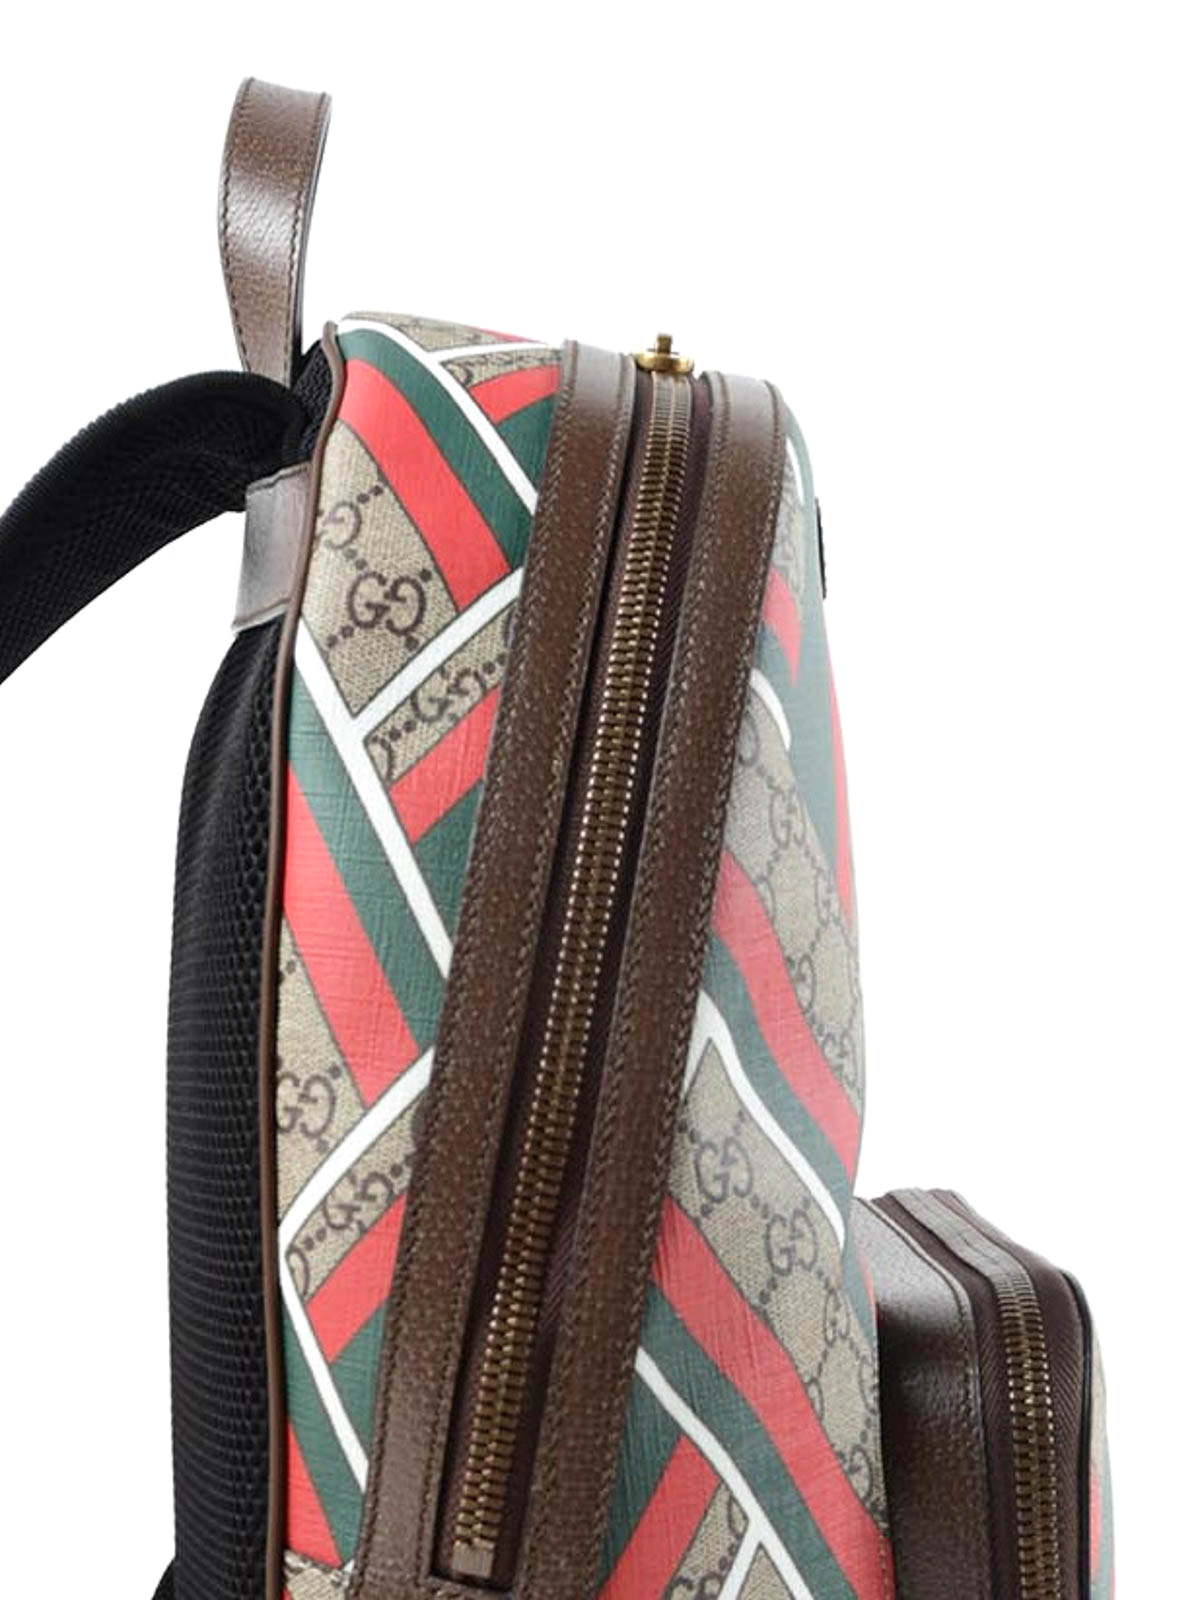 Gucci - GG Supreme and Chevron backpack - backpacks - 406370K1MIT8559